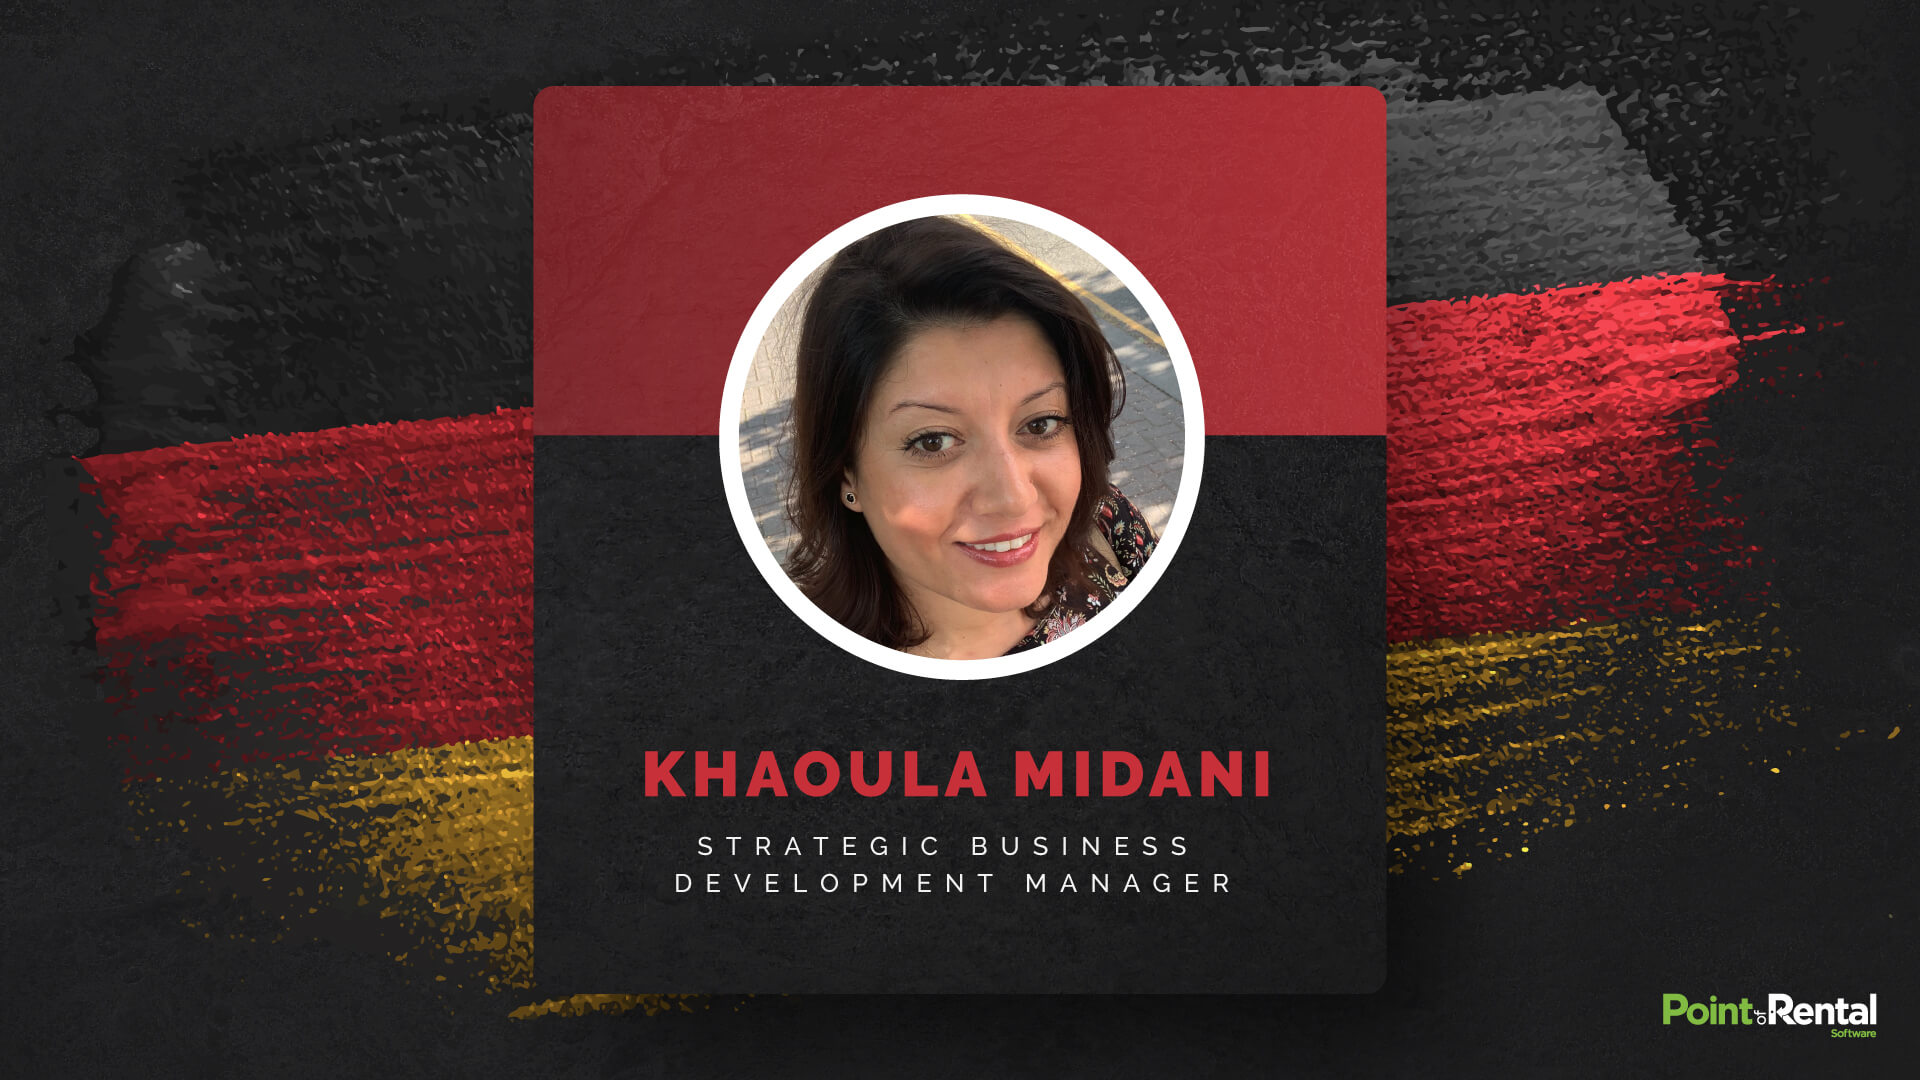 Khaoula Midani is joining Point of Rental's team in Germany.